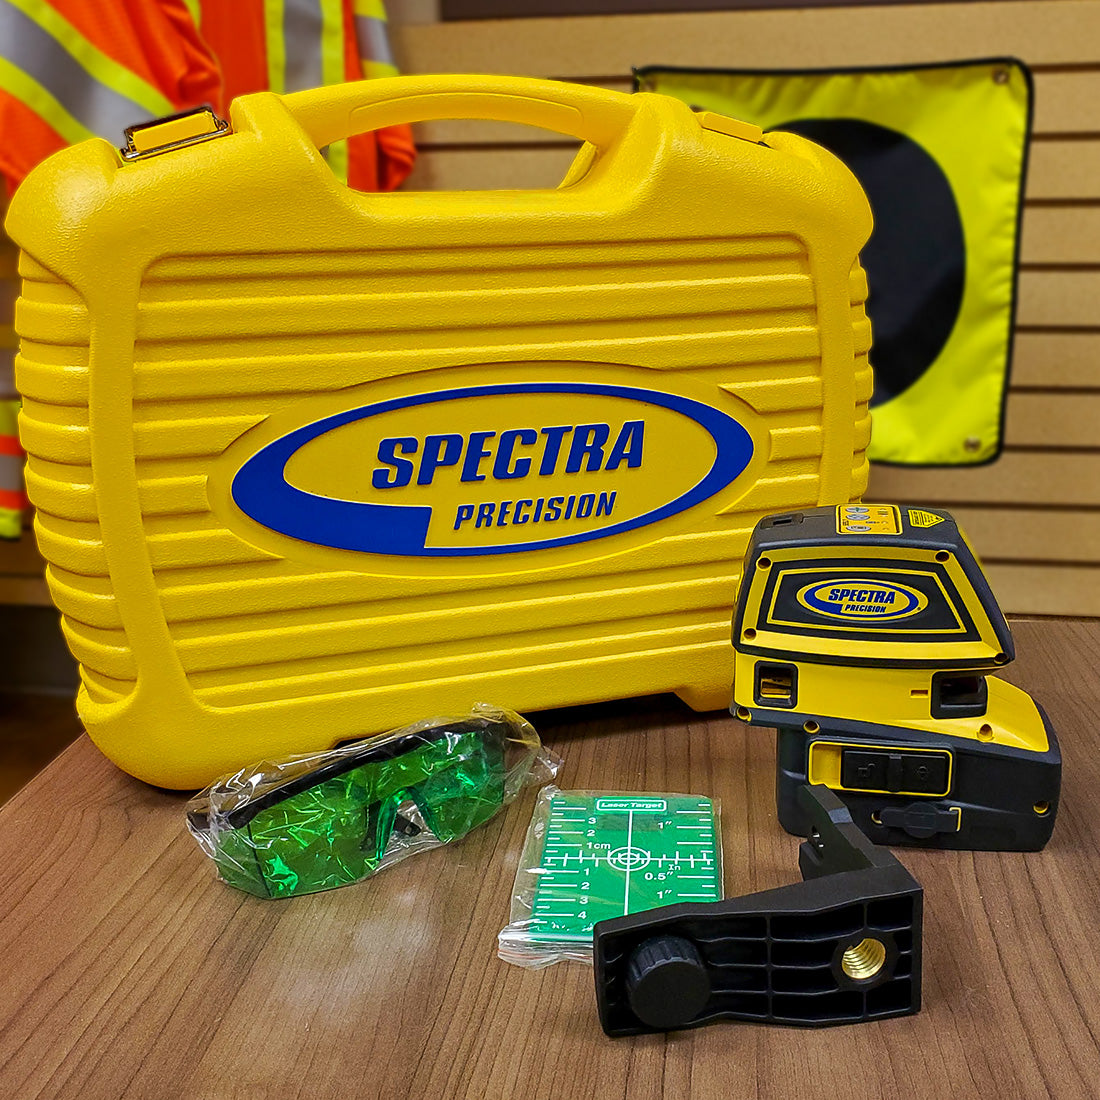 DEMO Spectra Precision LT52 Point & Line Green Laser Tool